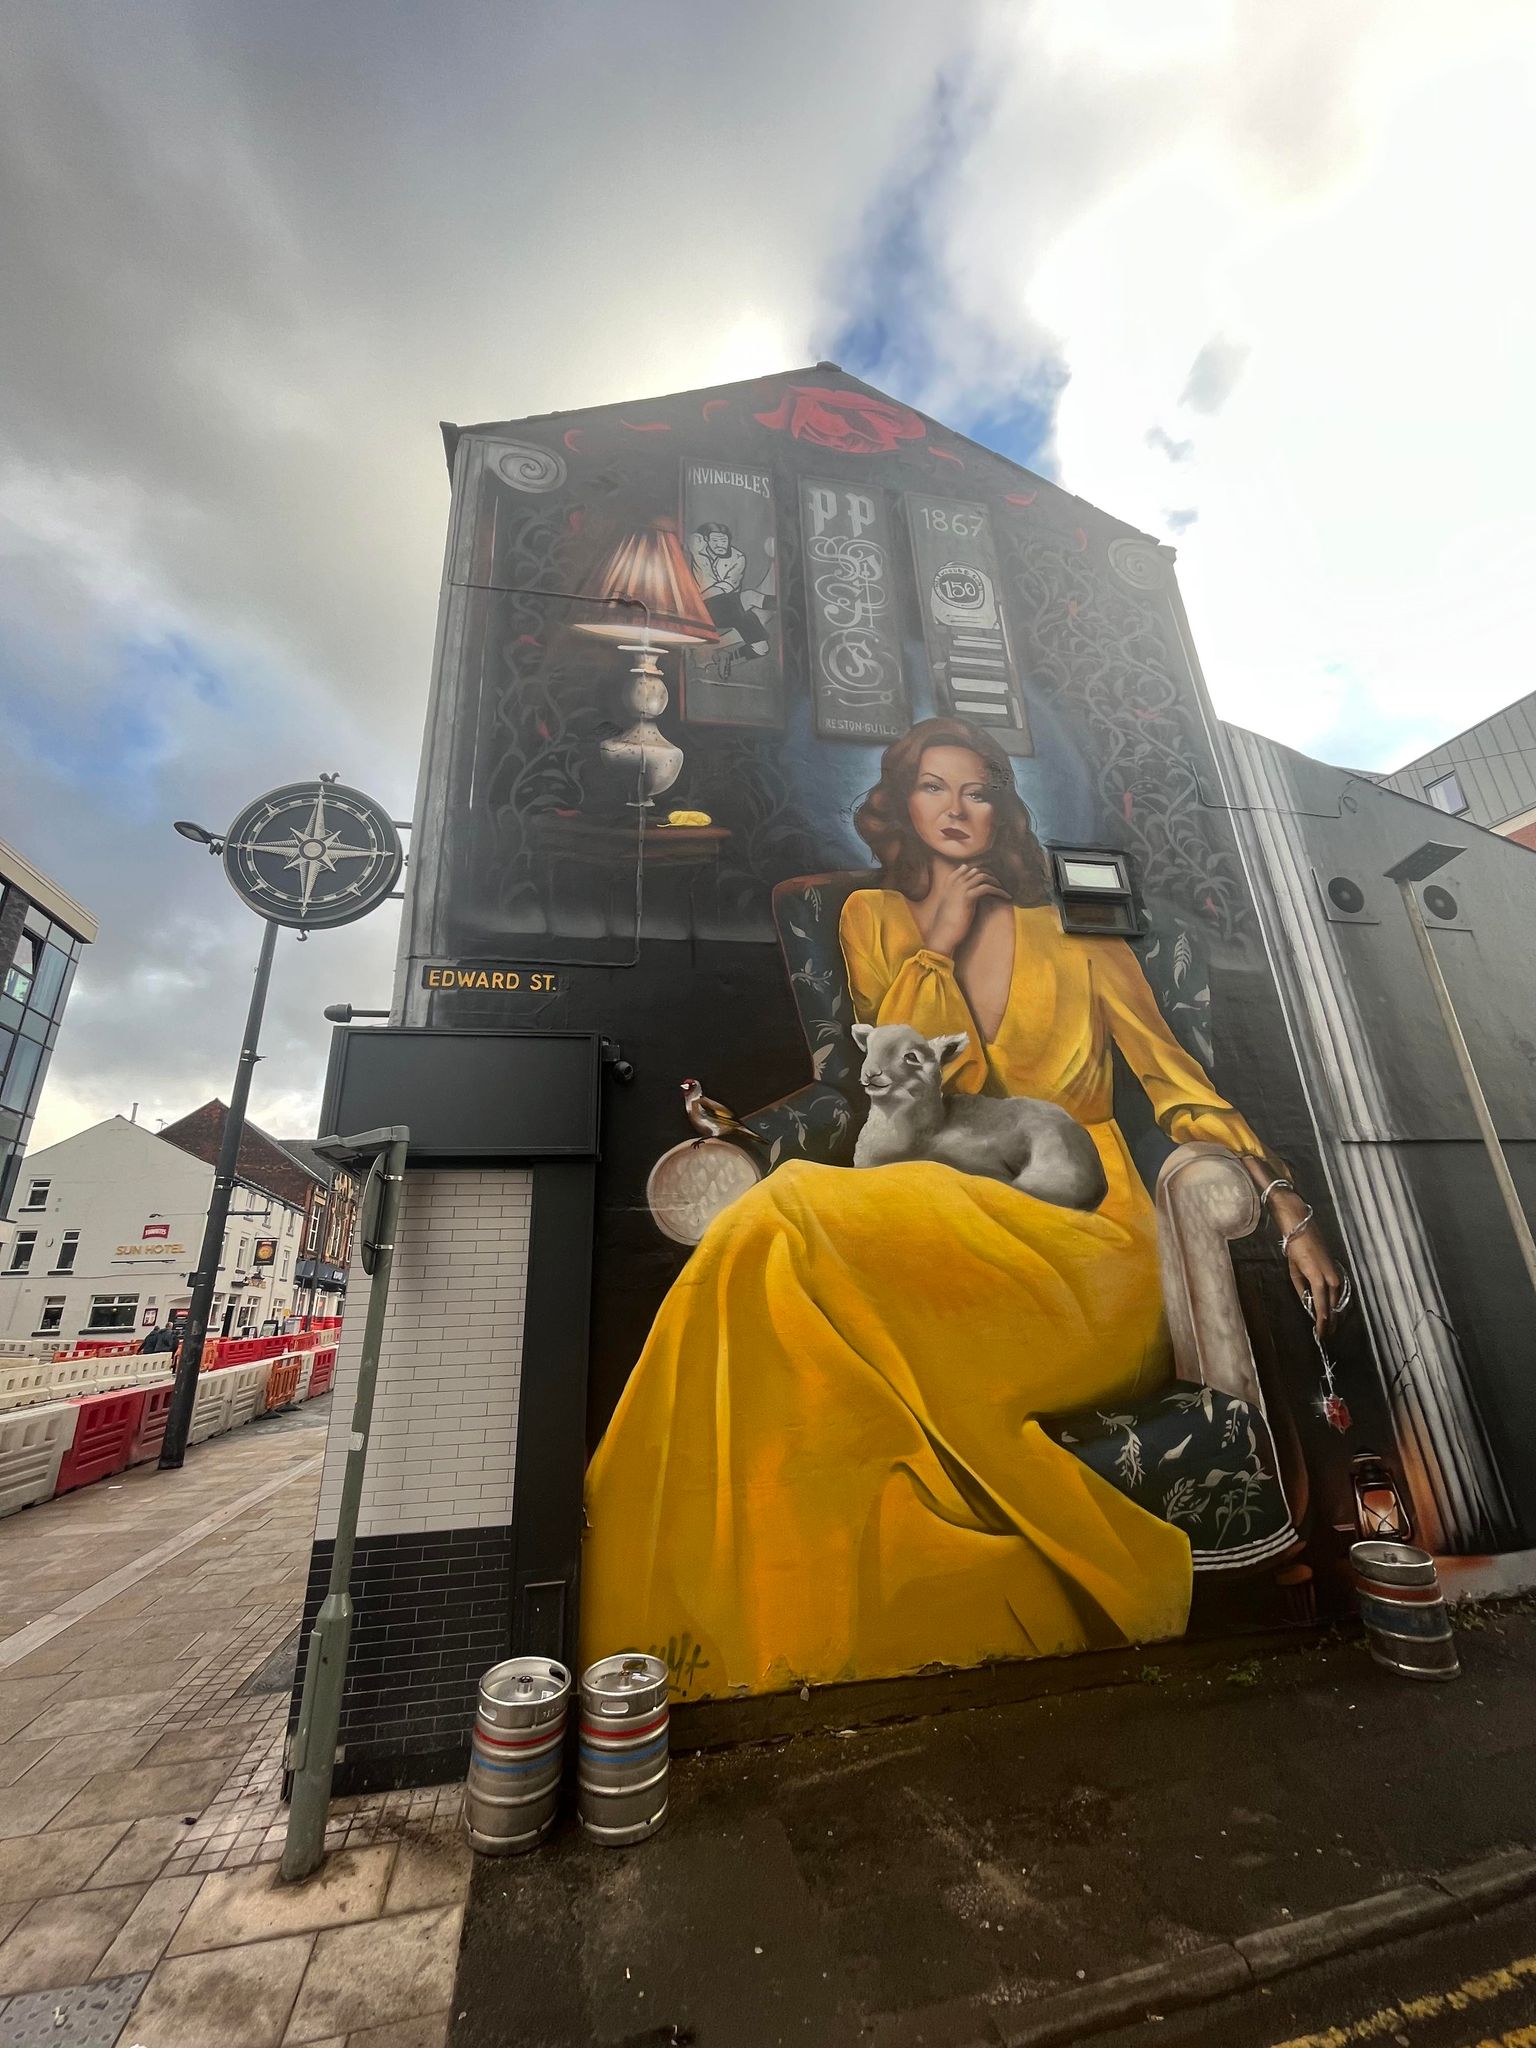 Image of a large street artwork of a woman in a yellow dress